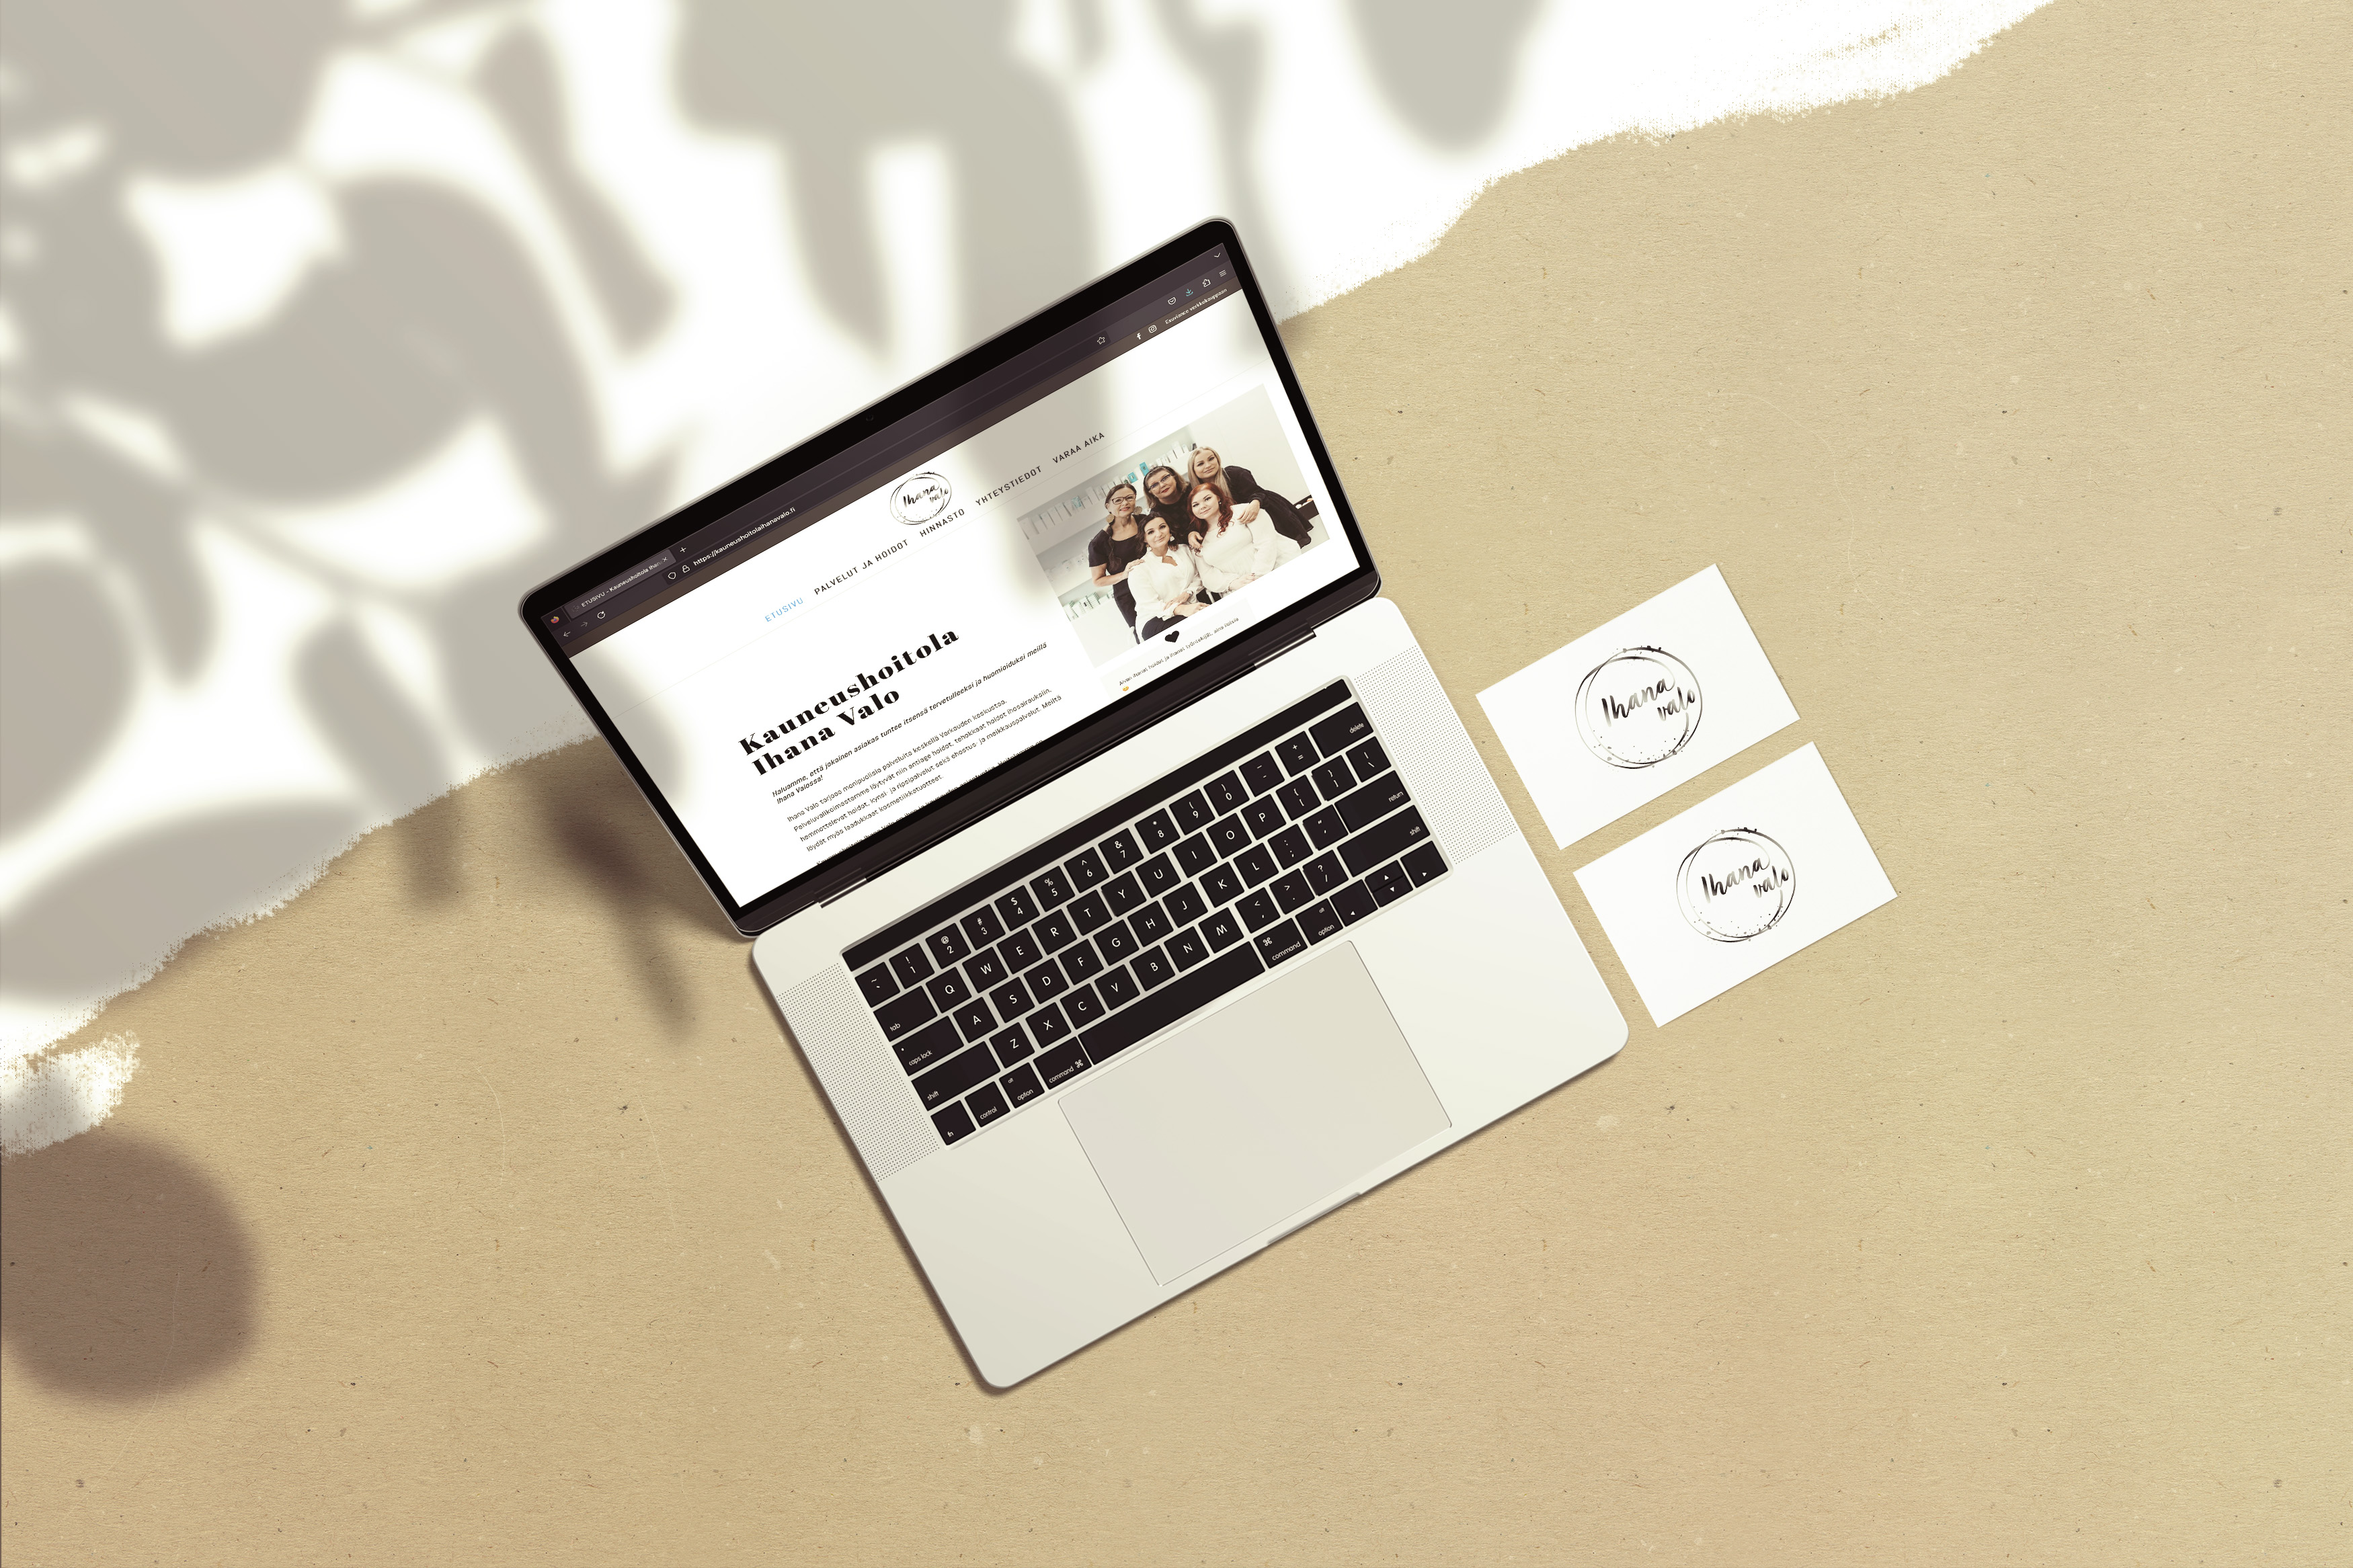 The website of Ihana Valo Oy opened on a laptop, along with two business cards